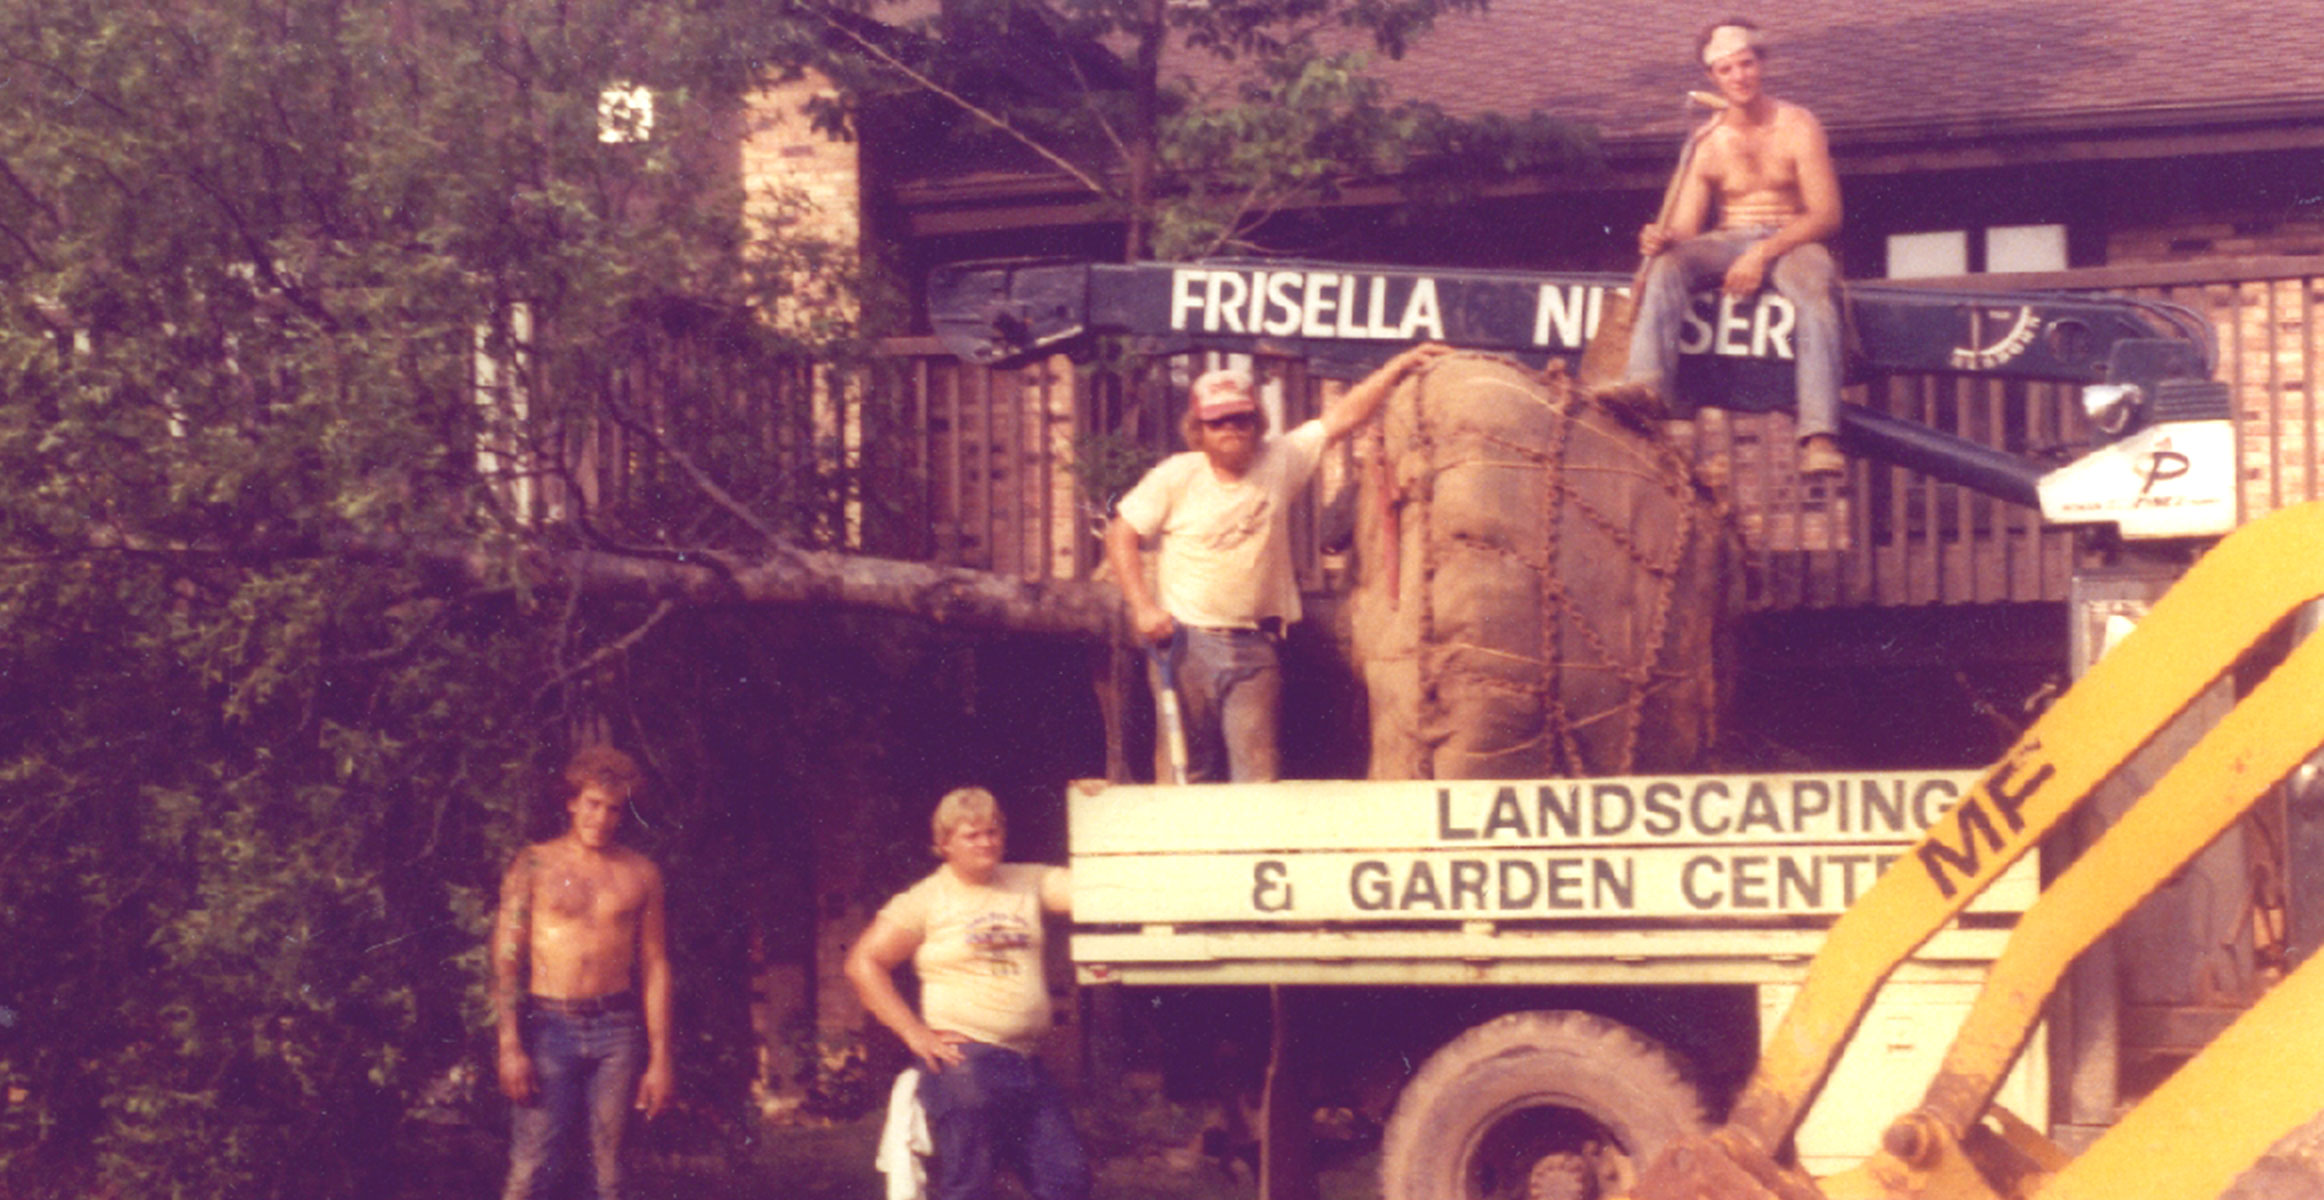 Photo of a vintage truck and Frisella employees hanging out